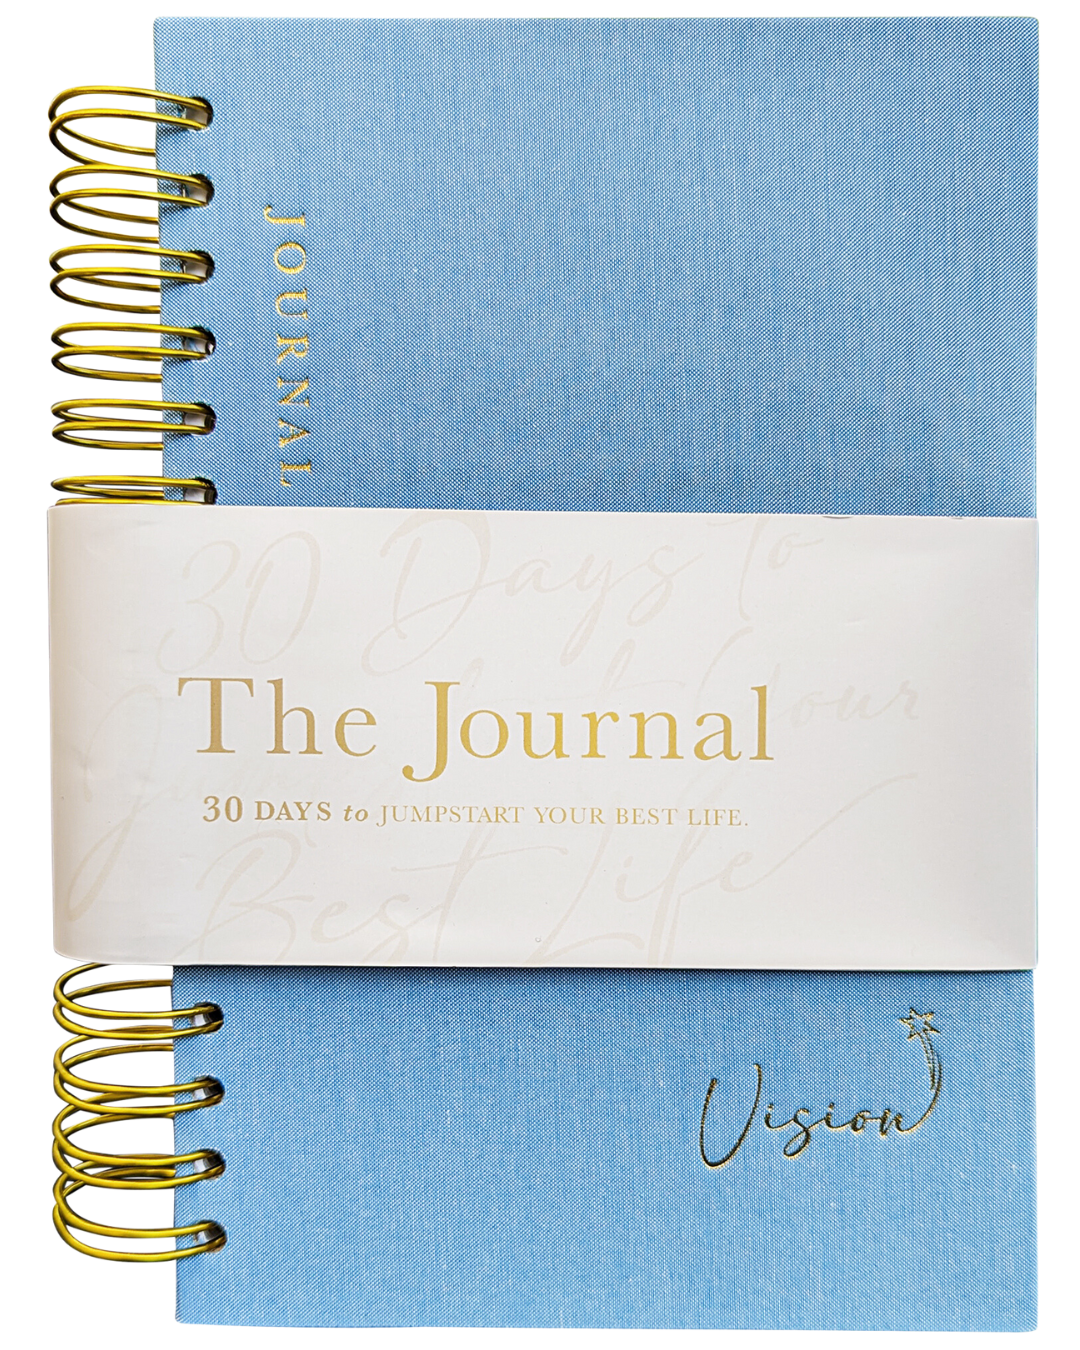 The Vision Journal